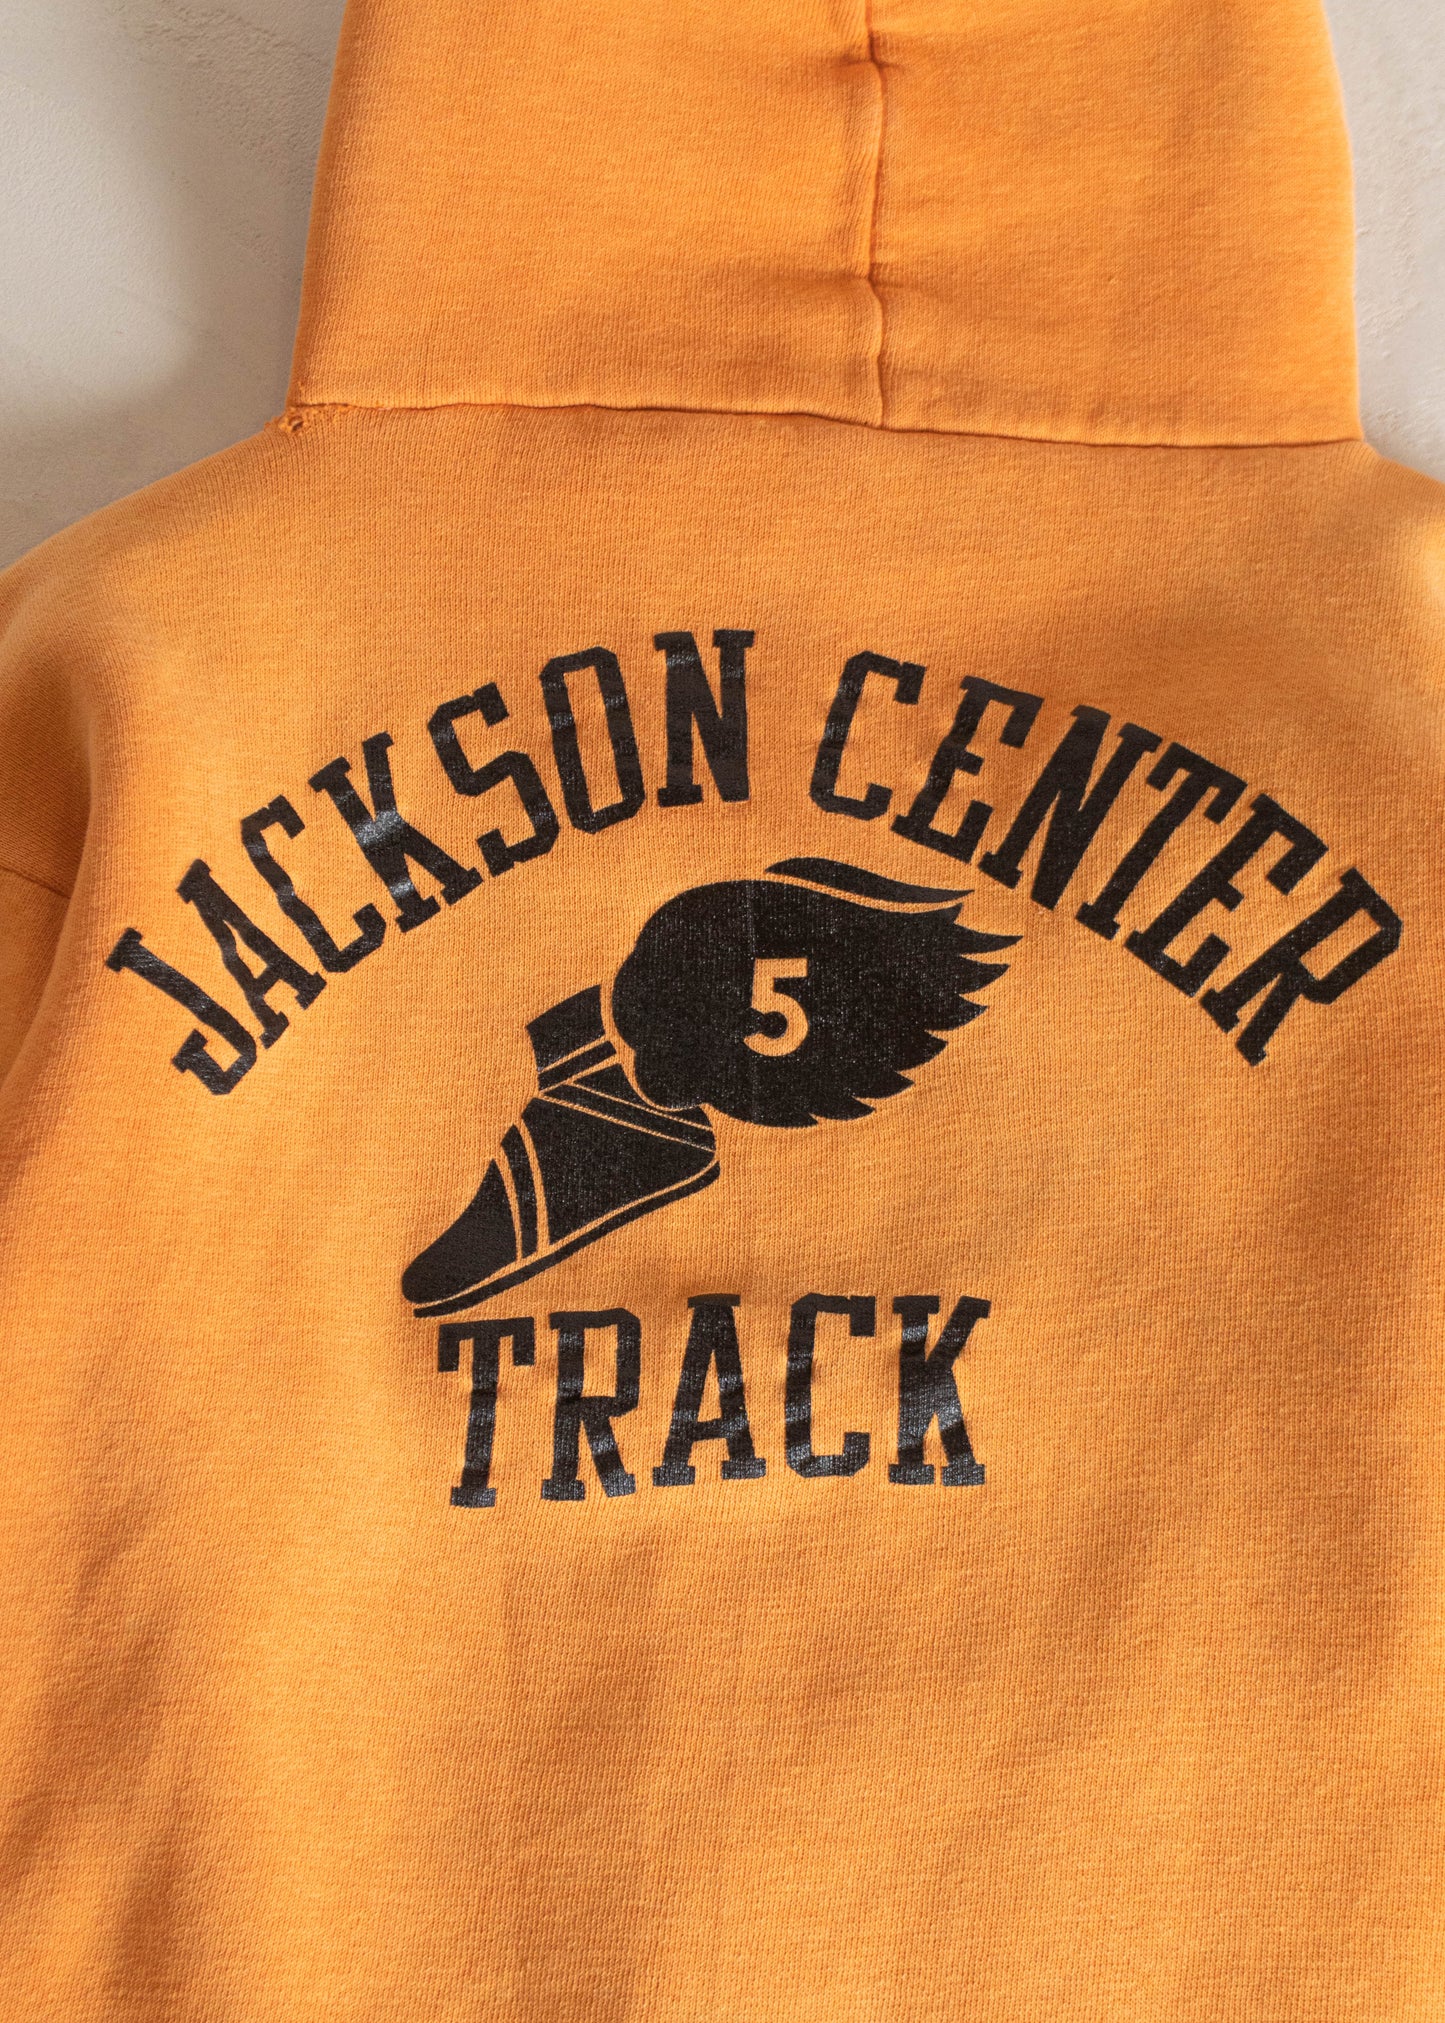 1970s Russell Athletic Jackson Center Track Hoodie Size XS/S